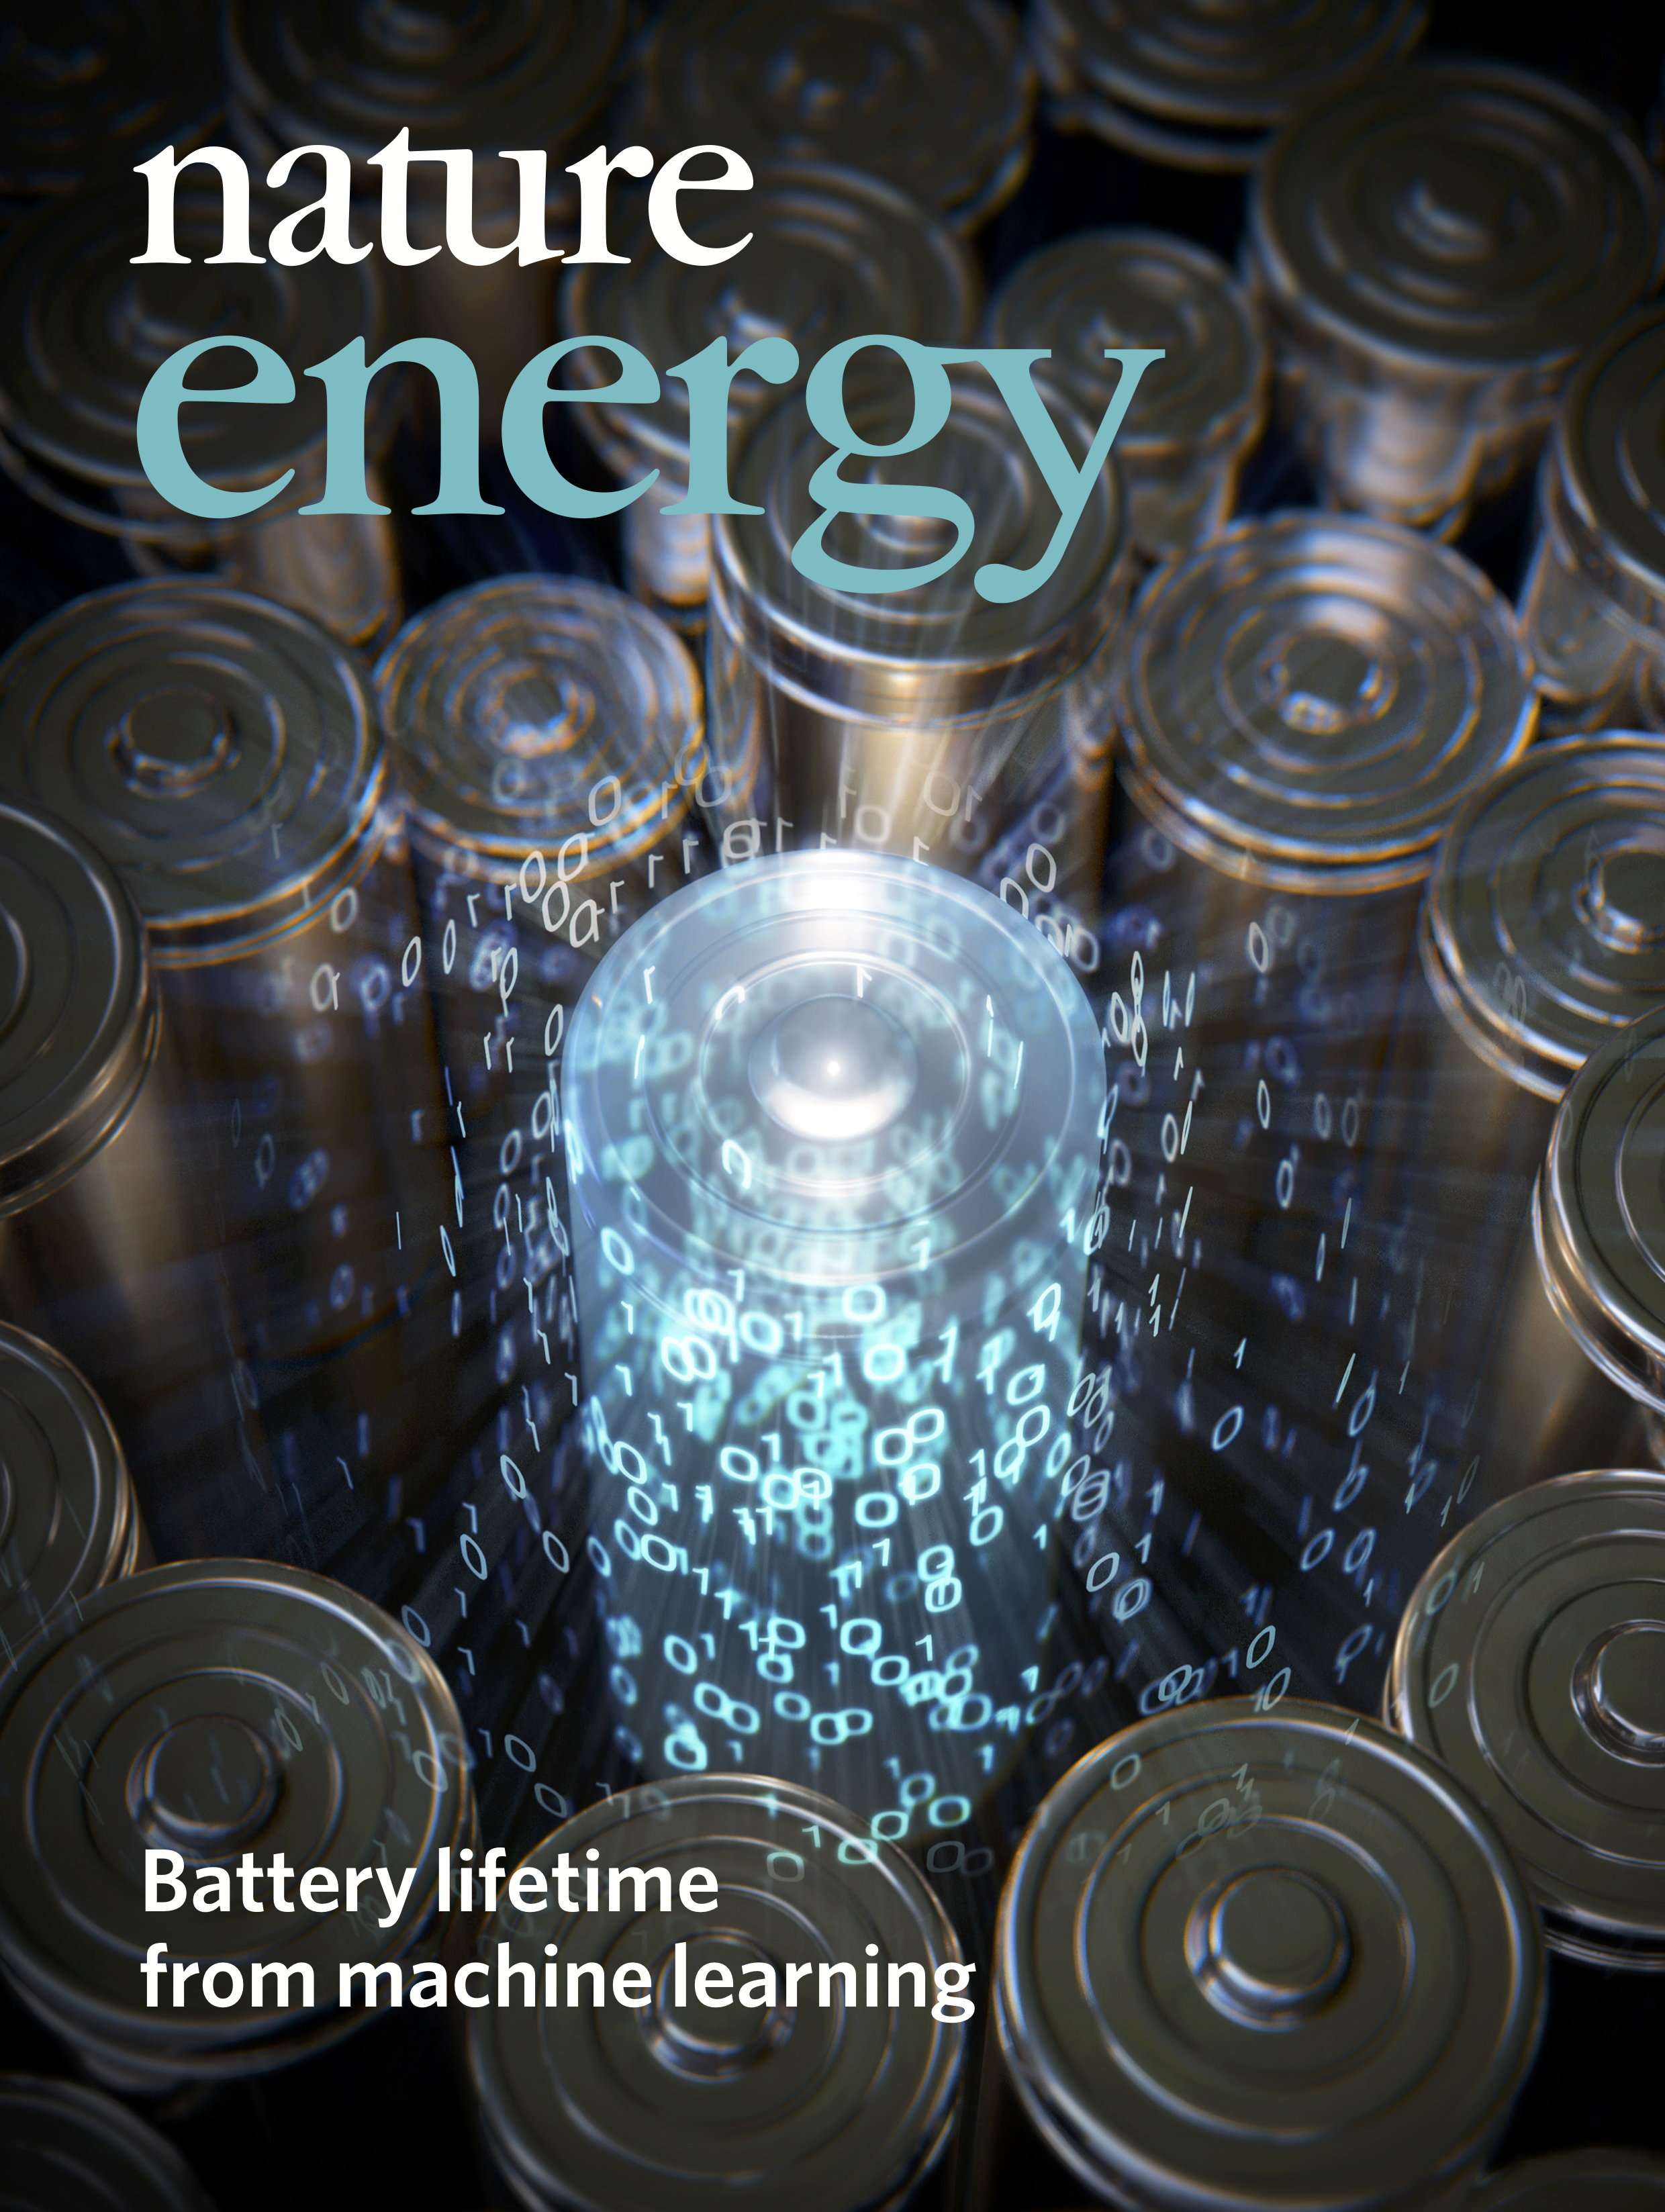 Oh pedal sammensnøret Paper published: Data-driven prediction of battery cycle life